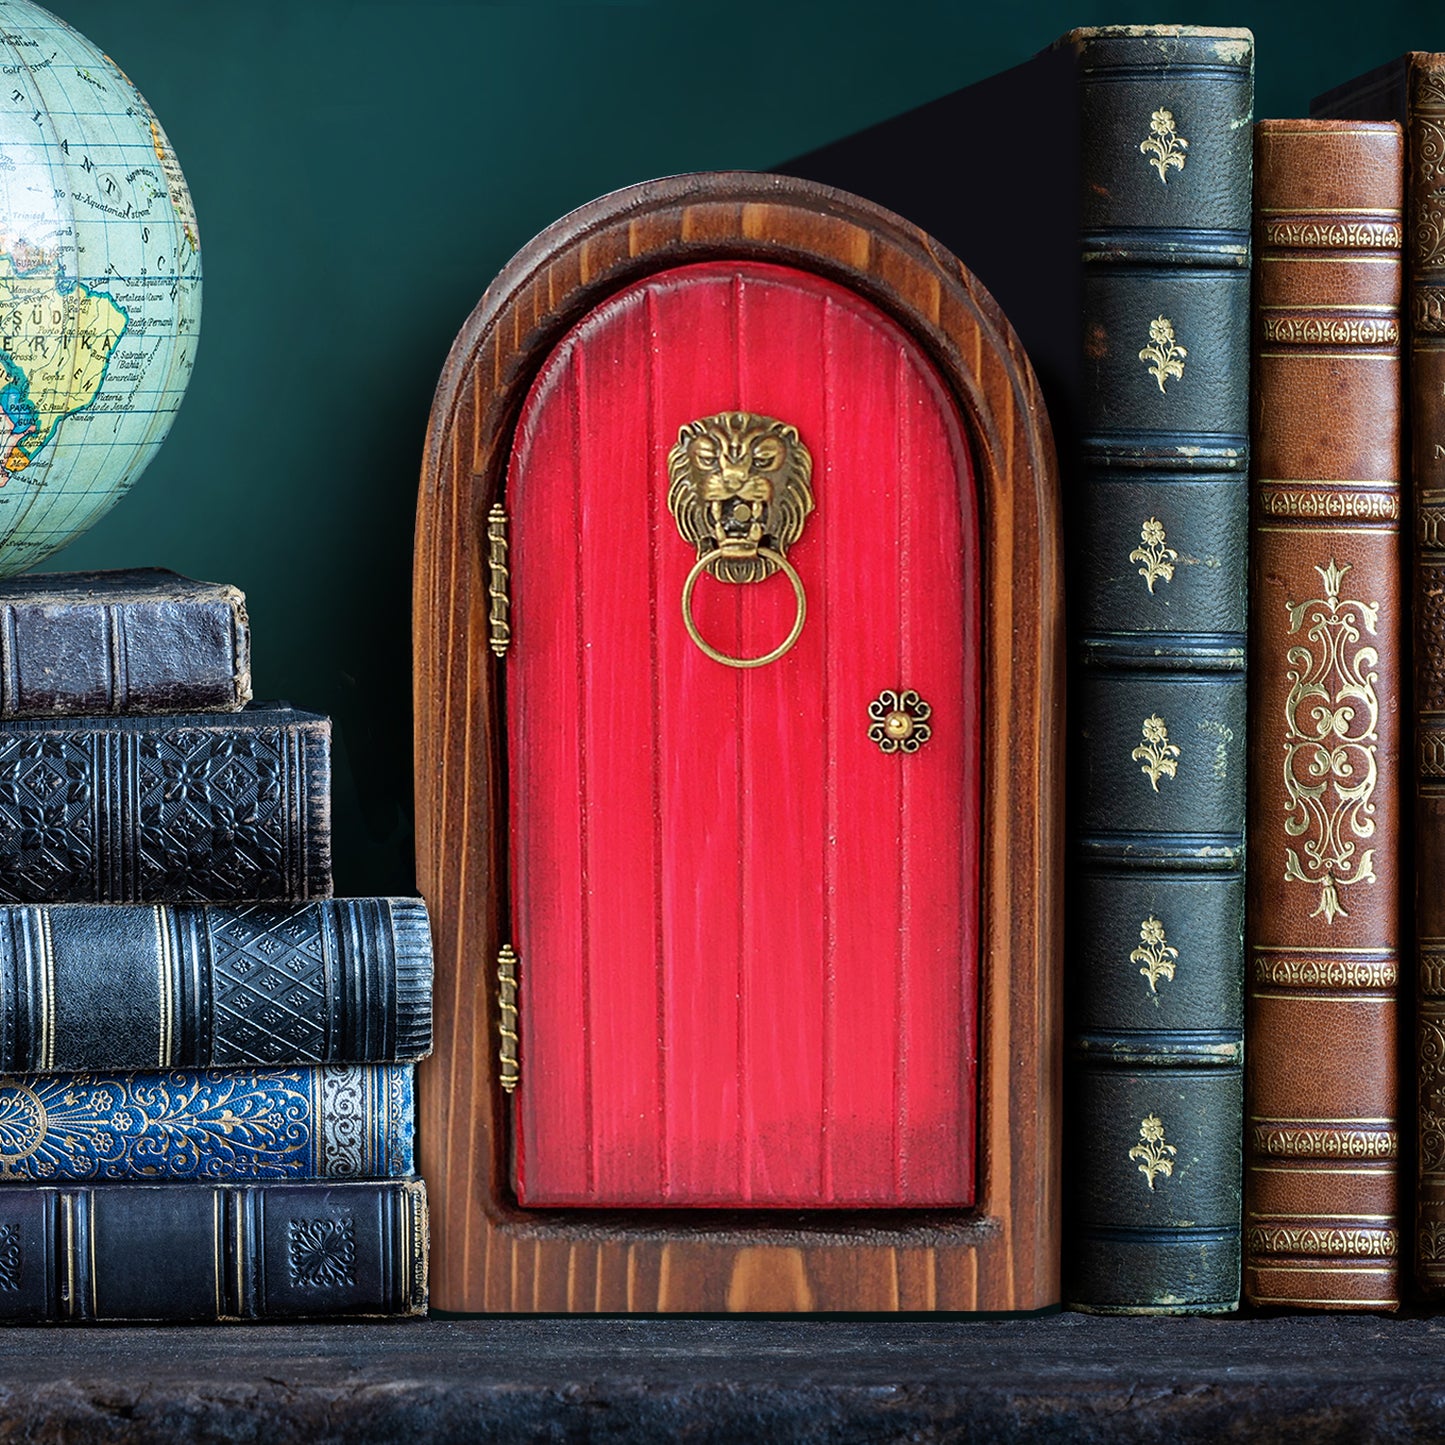 An arched wooden doorframe with a red door, sitting between leather-bound books. At the sides of the door are brass hinges. A brass doorknob sits at the right side, and a lion-head shaped knocker with a hood is at the top of the door.